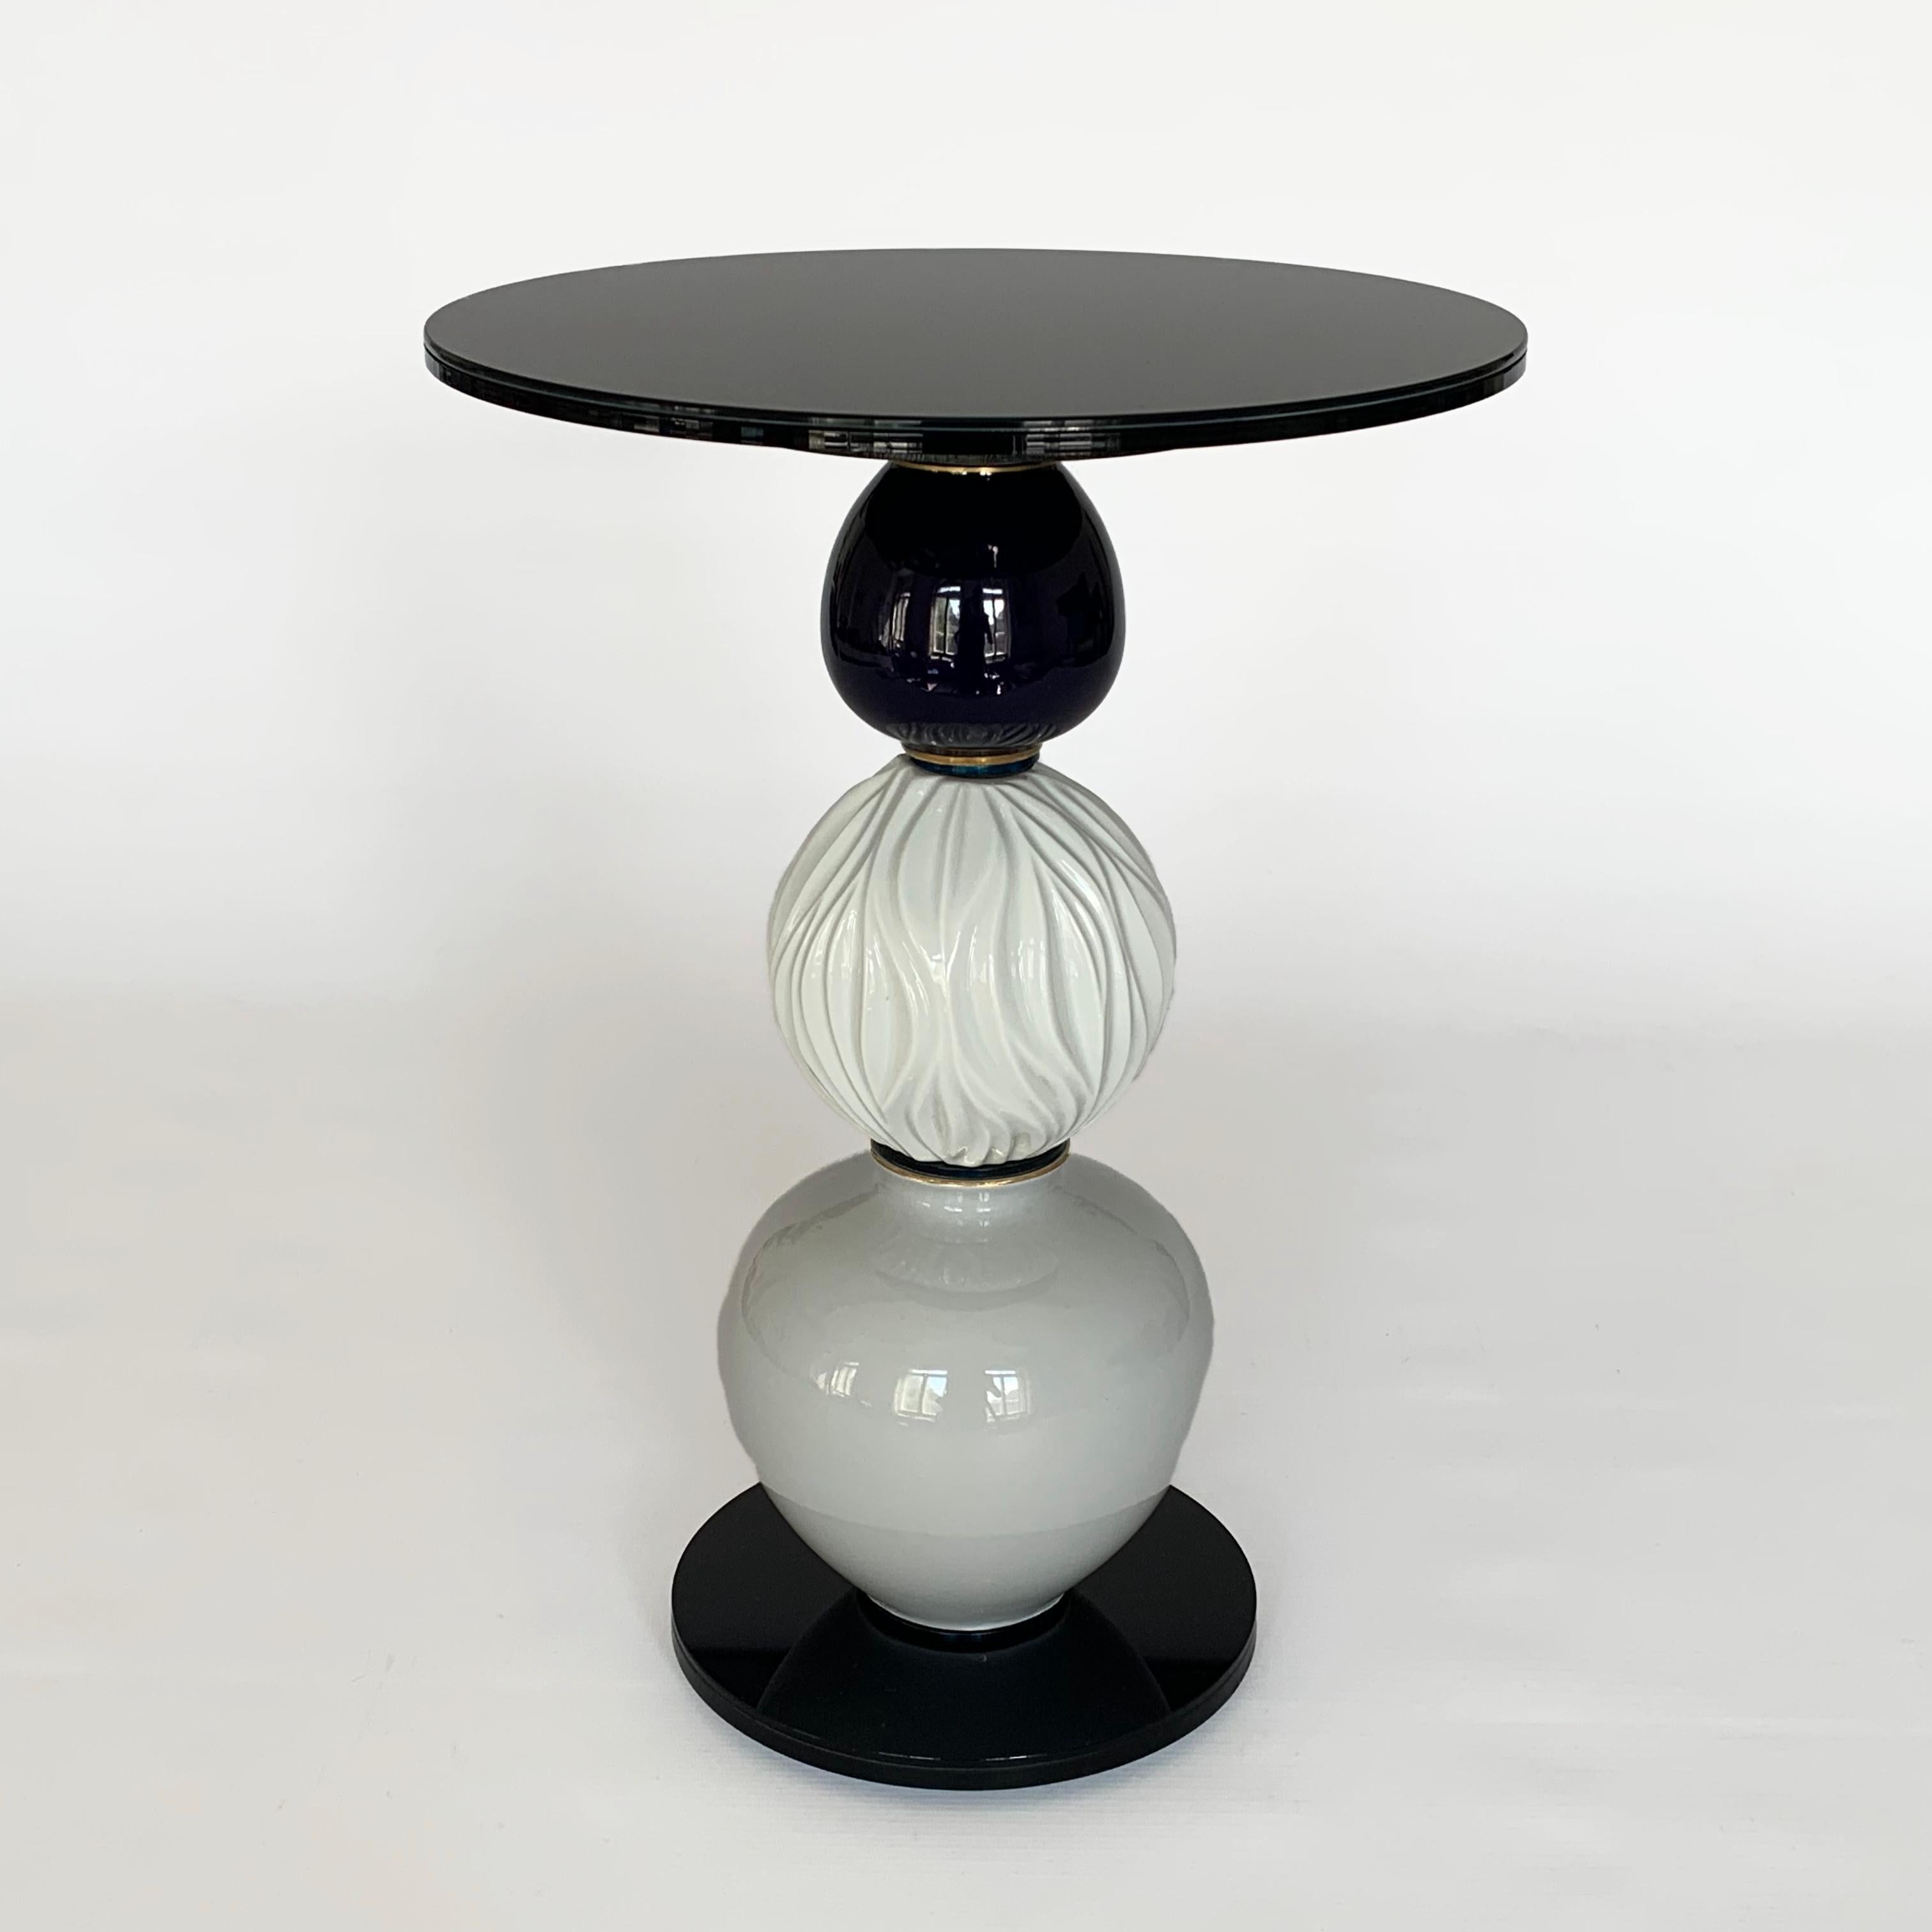 German 'After the Rain' Side Table, Vintage Ceramics and Glass, One off Piece For Sale